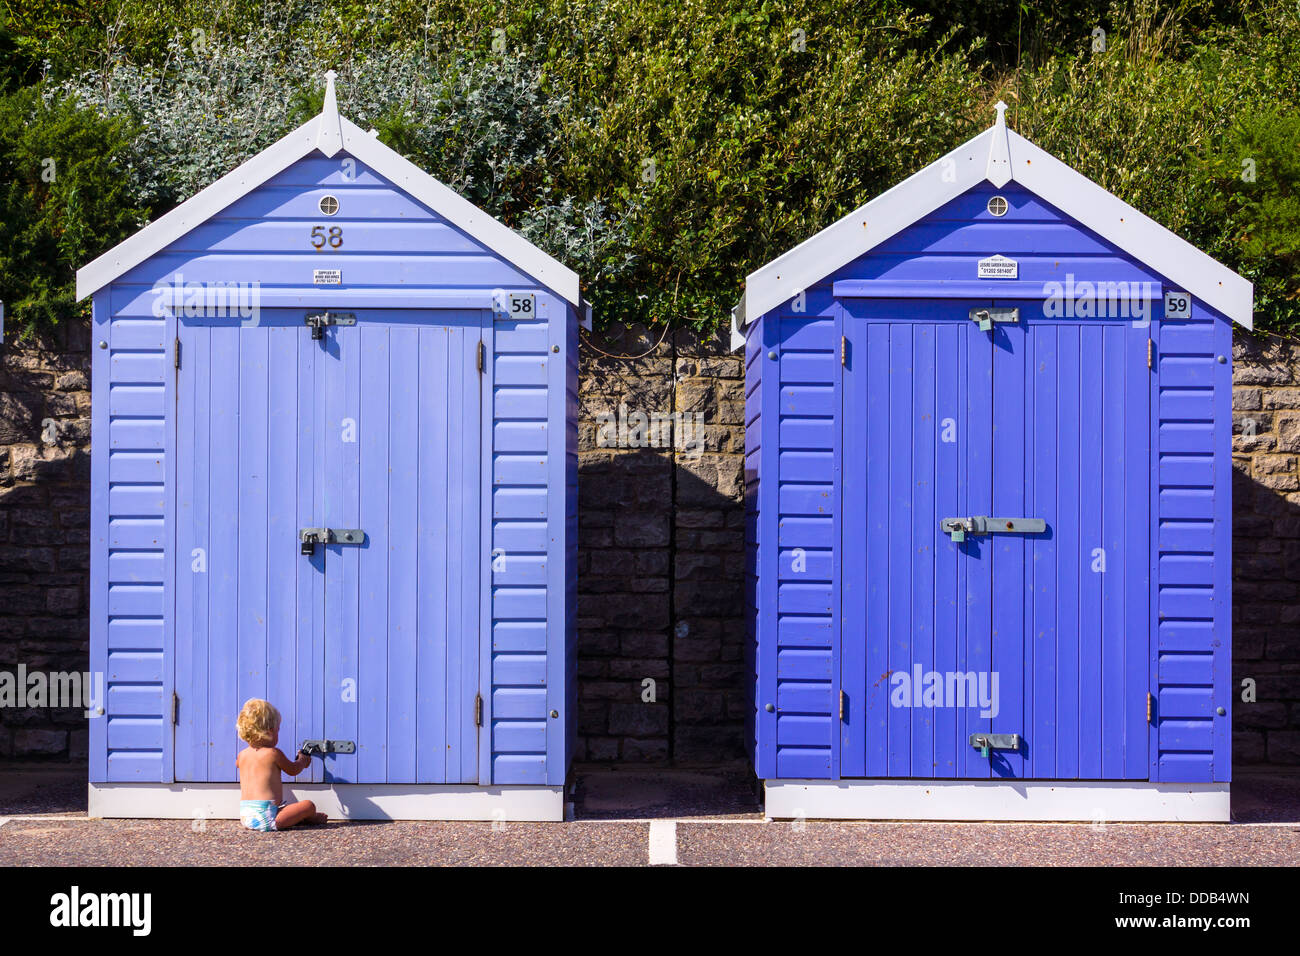 A small child in a nappy plays with the lock to a Beach hut on the seafront in Bournemouth, England. Stock Photo